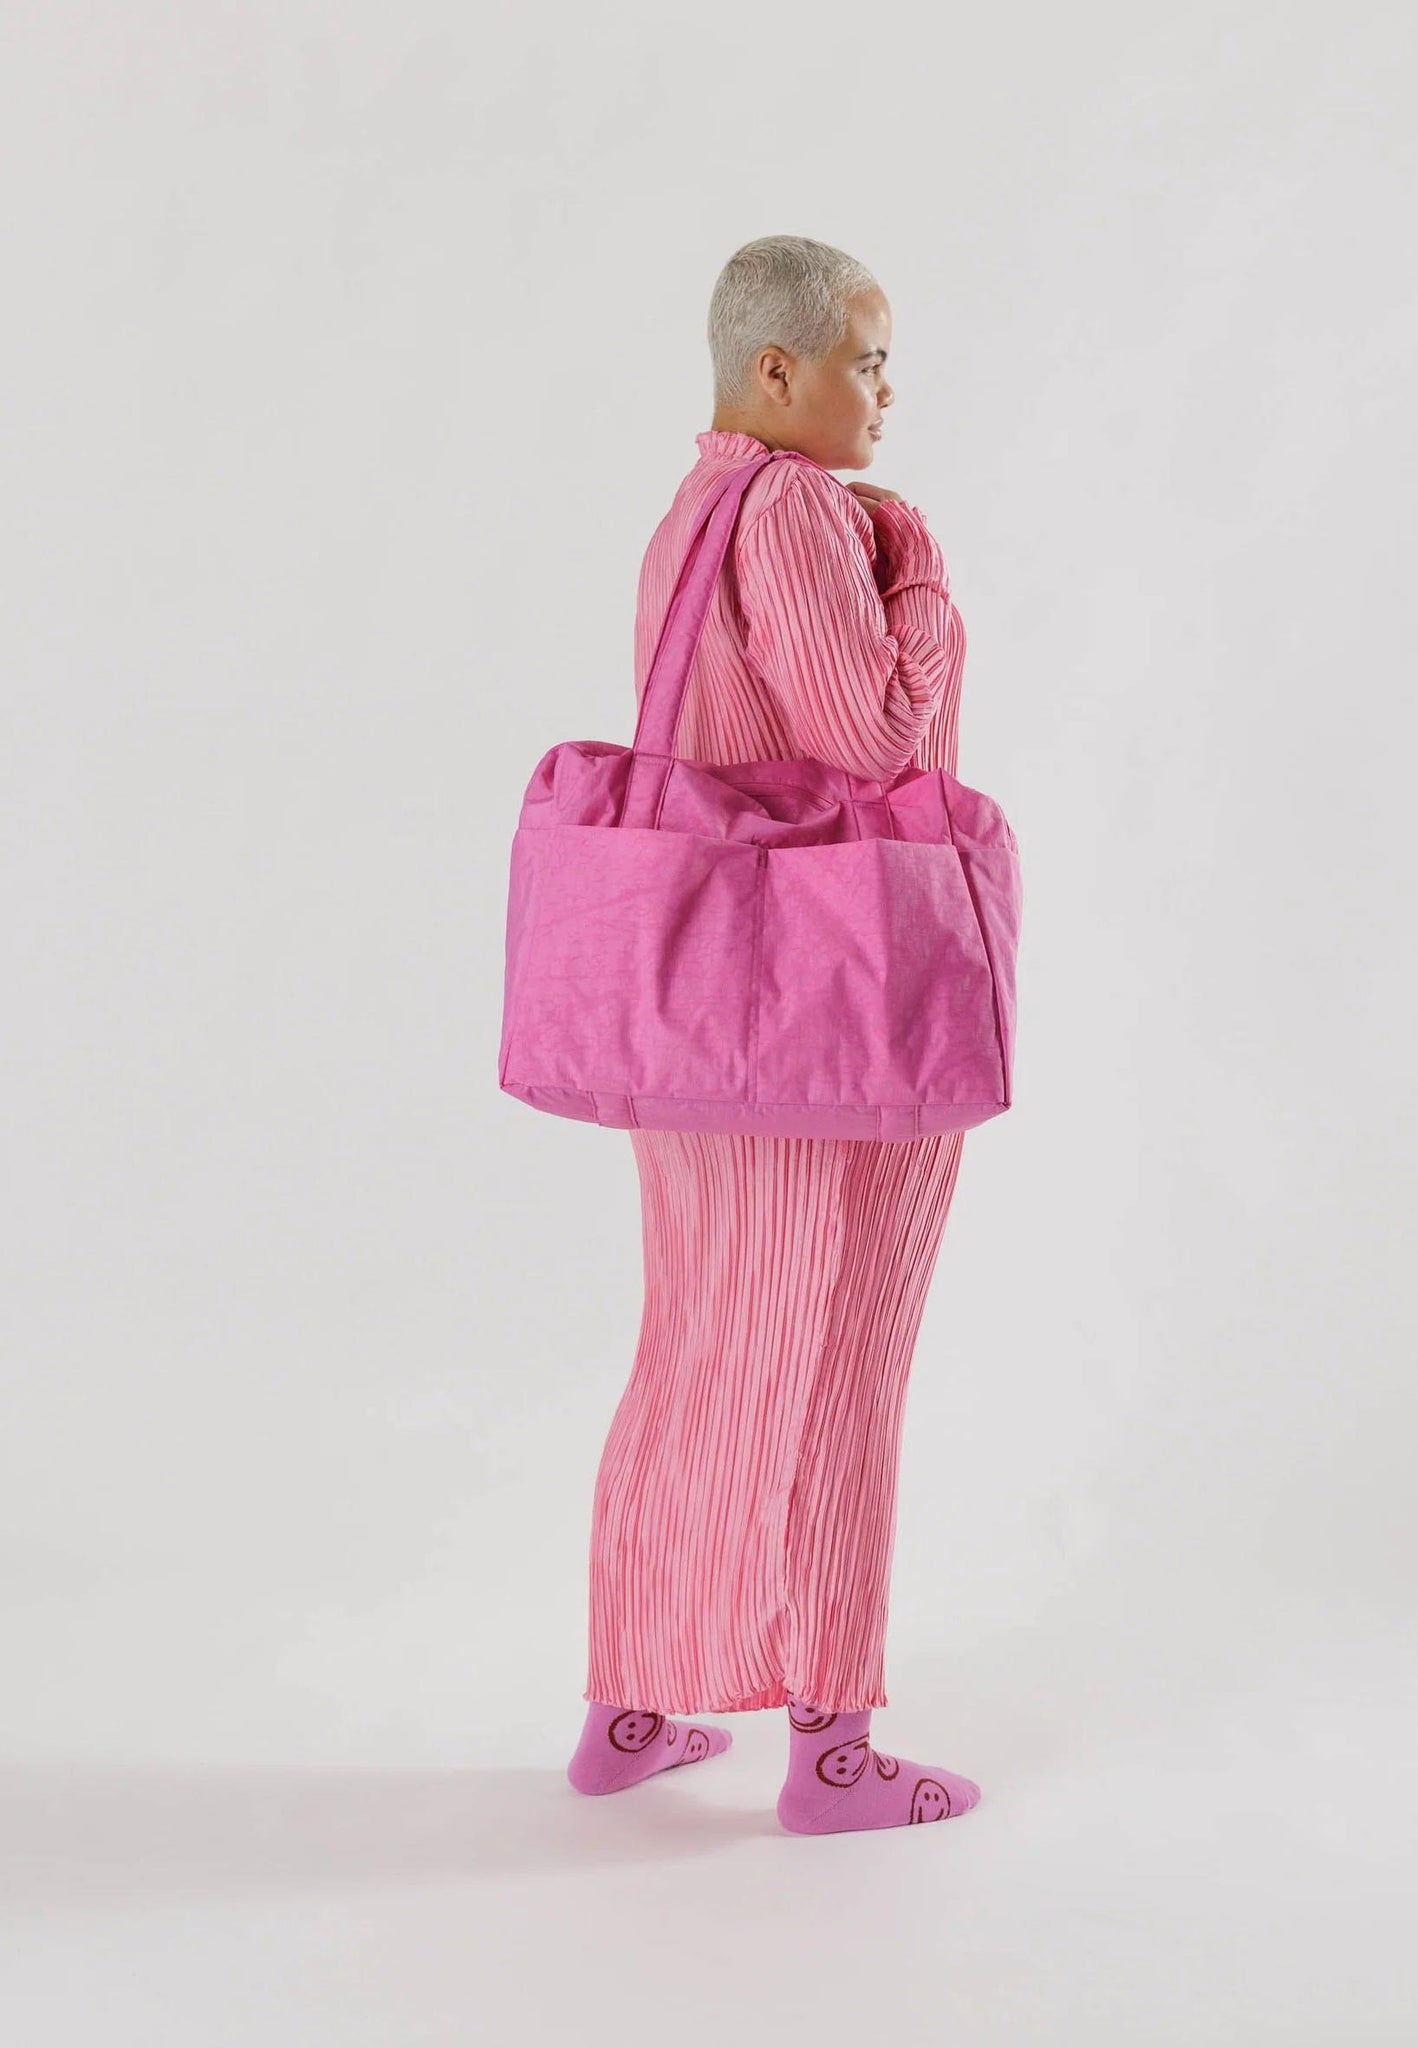 Baggu Cloud Carry-On Extra Pink